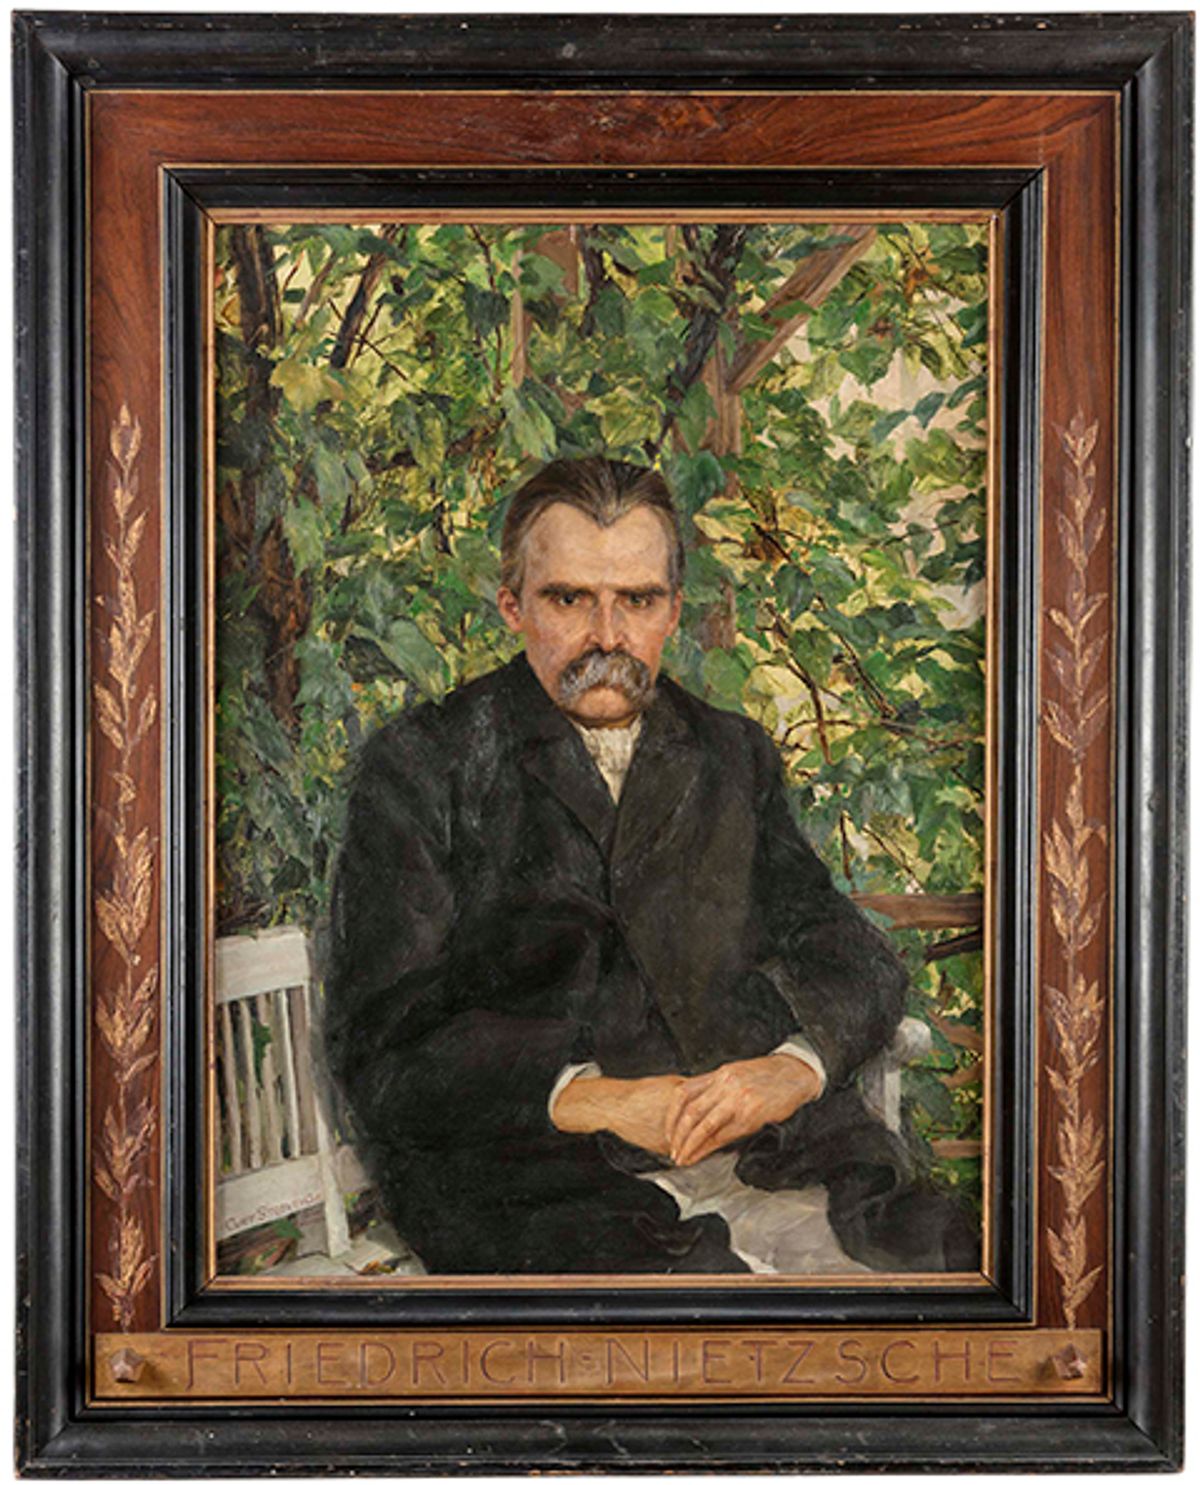 The first-ever portrait of Friedrich Nietzsche was painted by Curt Stoeving in 1894 Image: © Klassik Stiftung Weimar, Bestand Museen